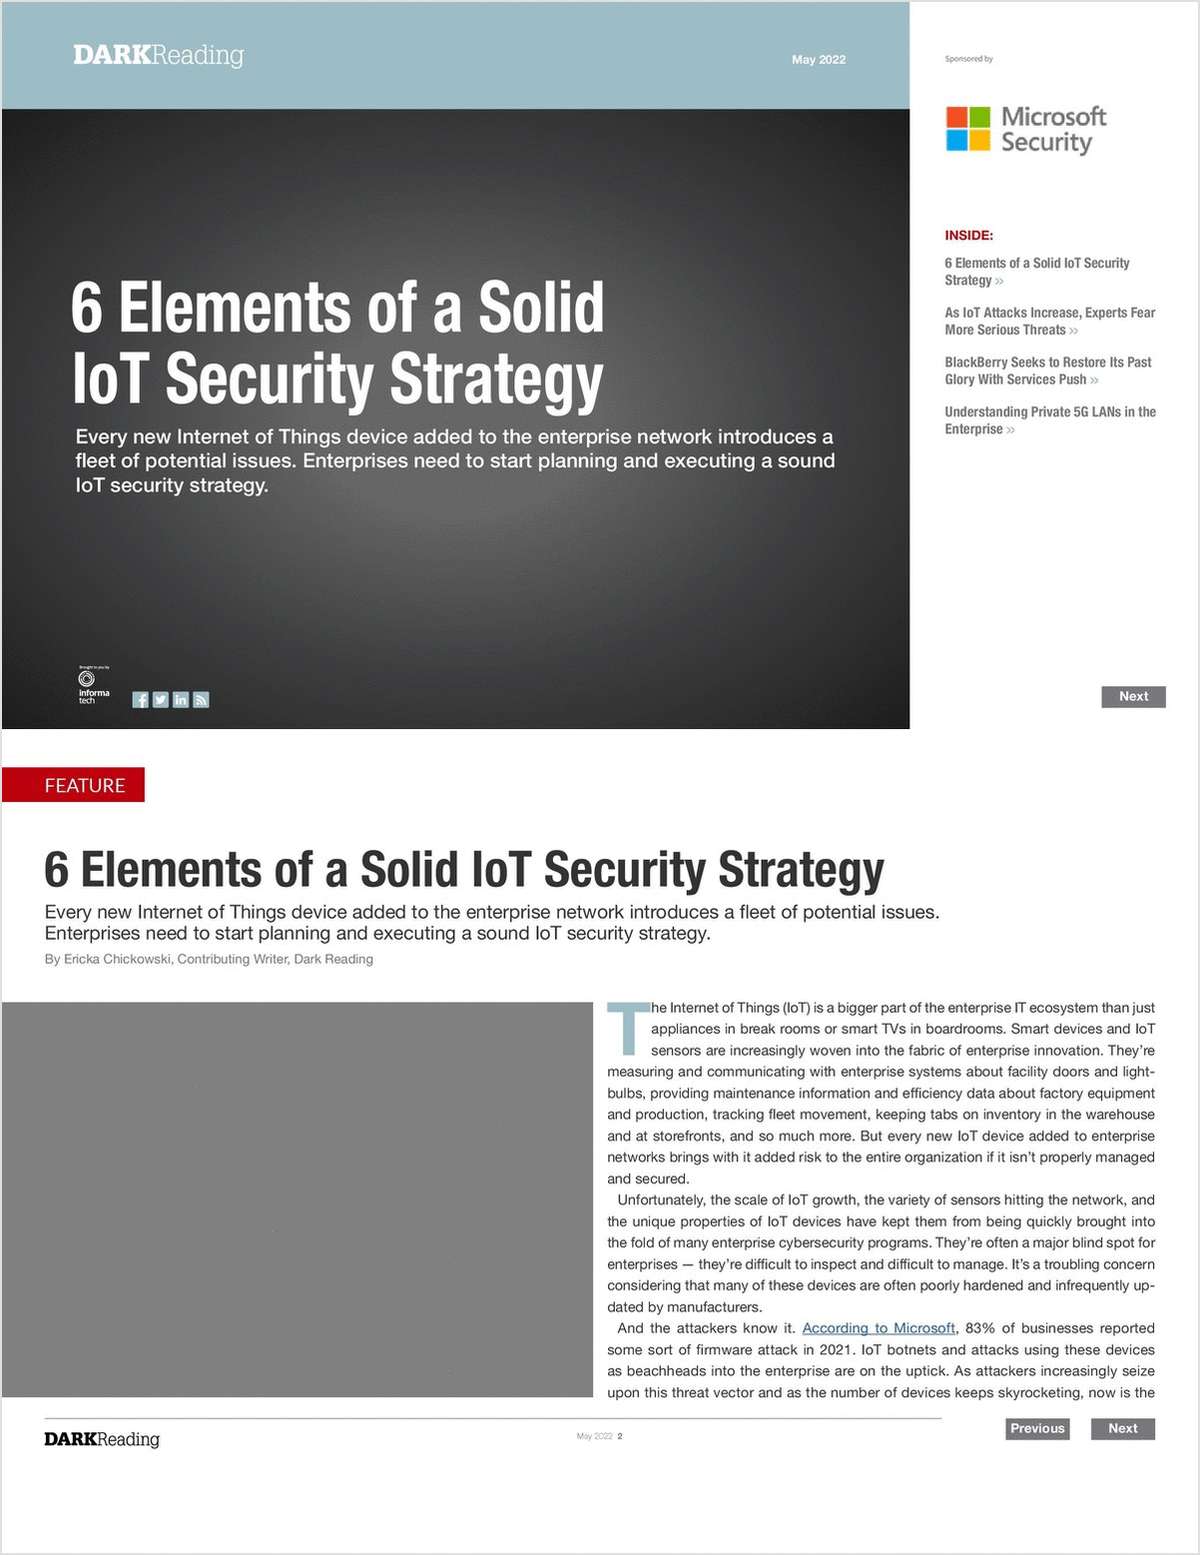 6 Elements of a Solid IoT Security Strategy